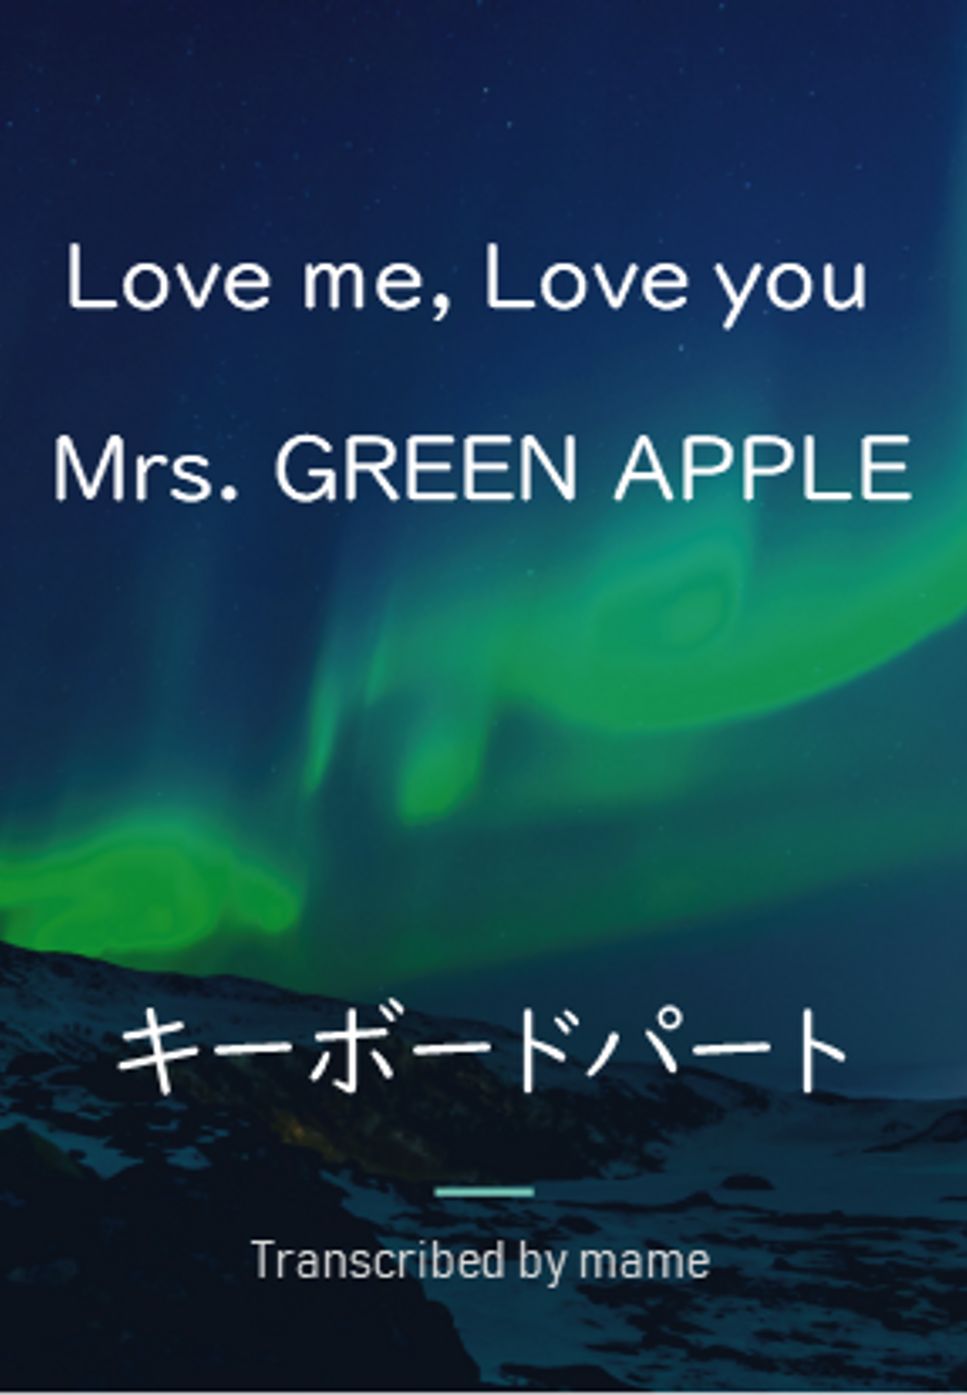 Mrs. GREEN APPLE - Love me, Love you (キーボードパート) by mame